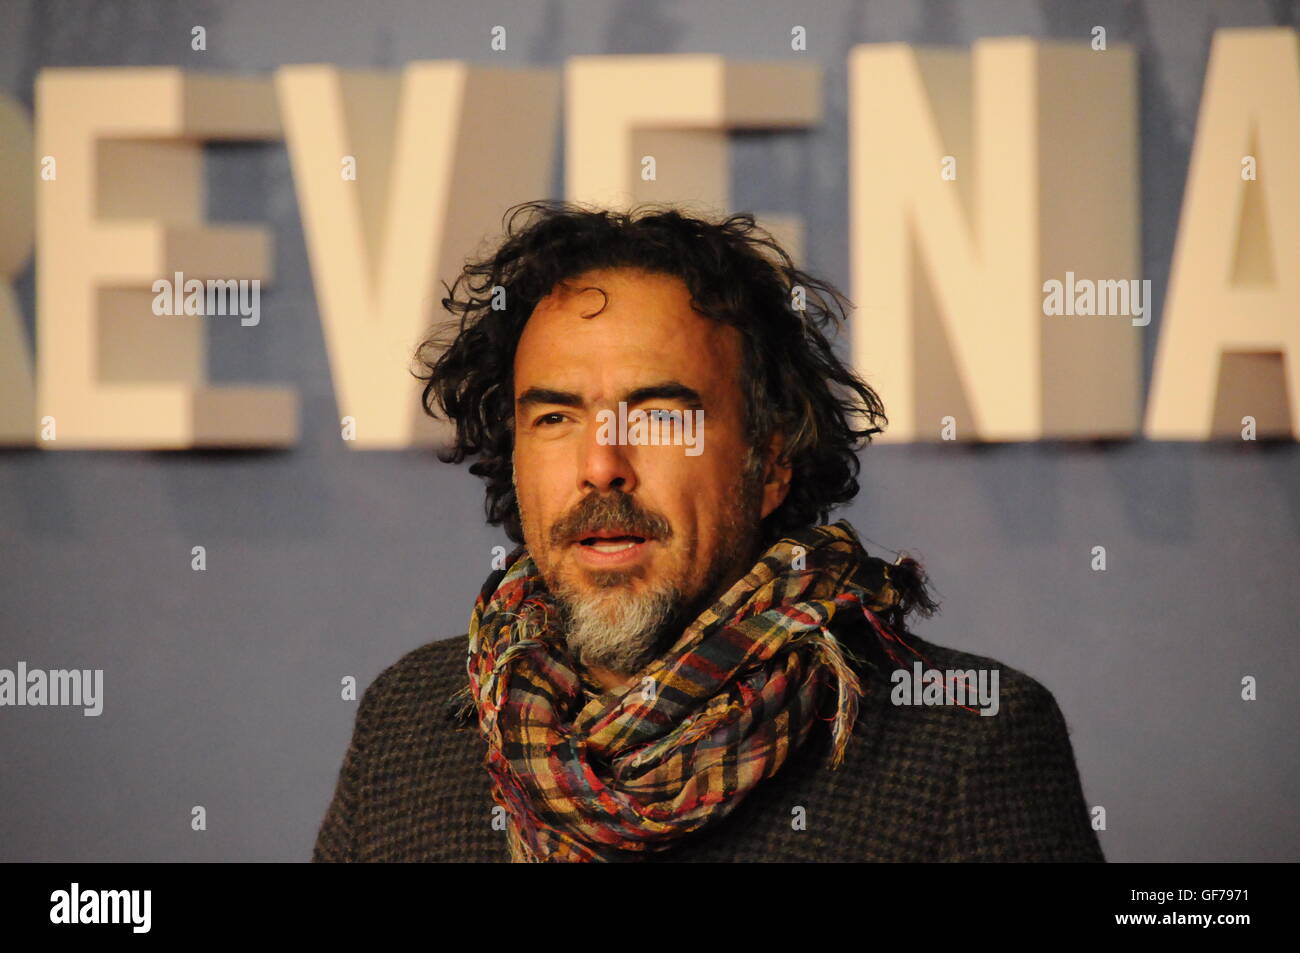 Joe gonzalez red carpet event hi-res stock photography and images - Alamy